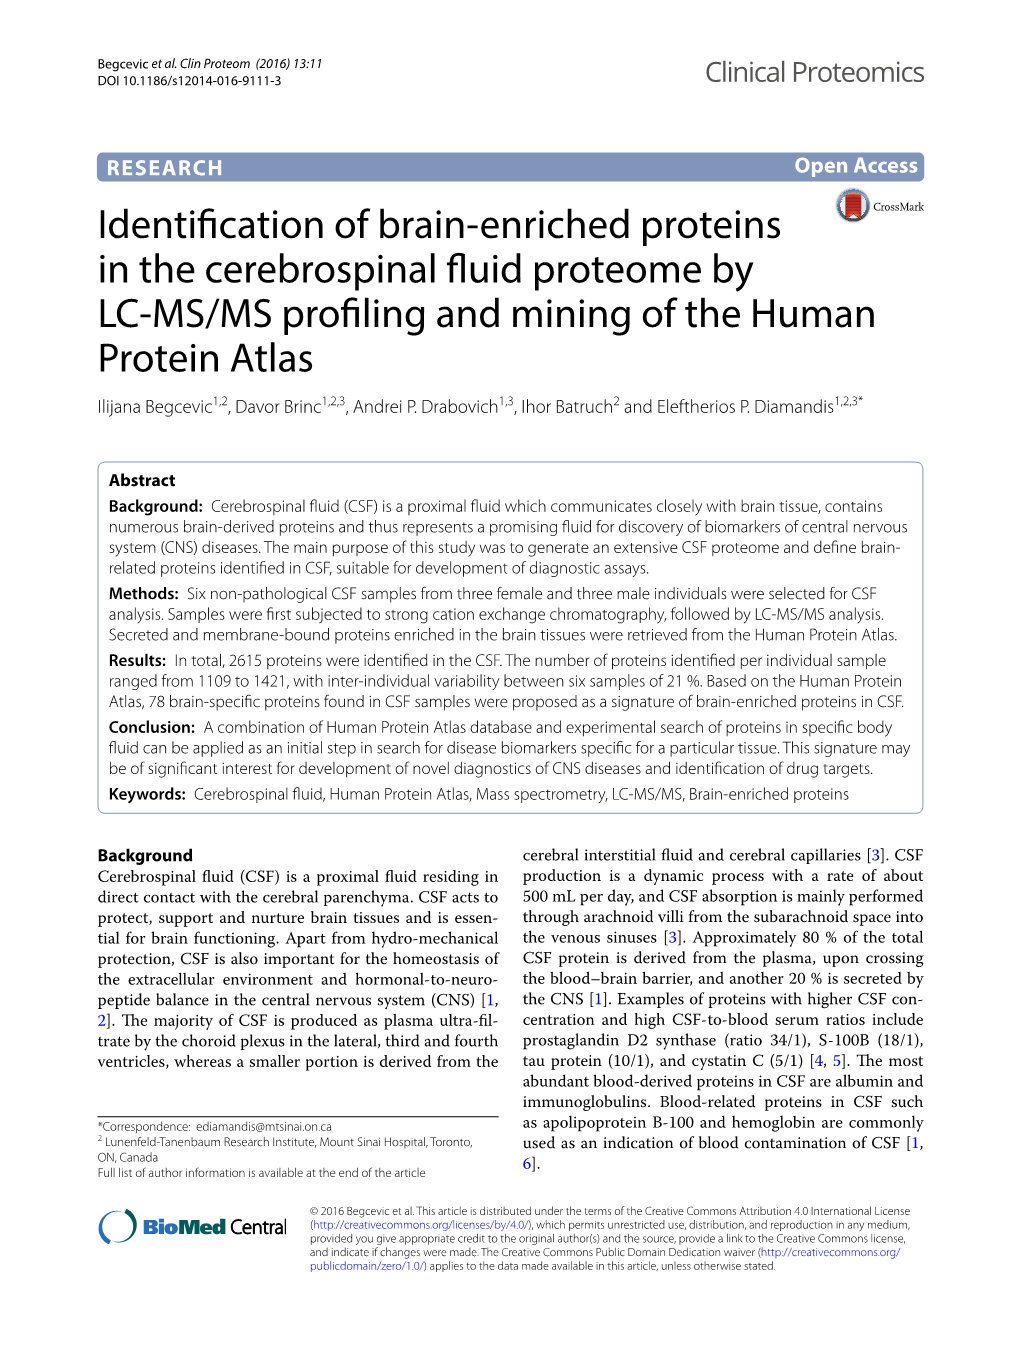 Identification of Brain-Enriched Proteins in the Cerebrospinal Fluid